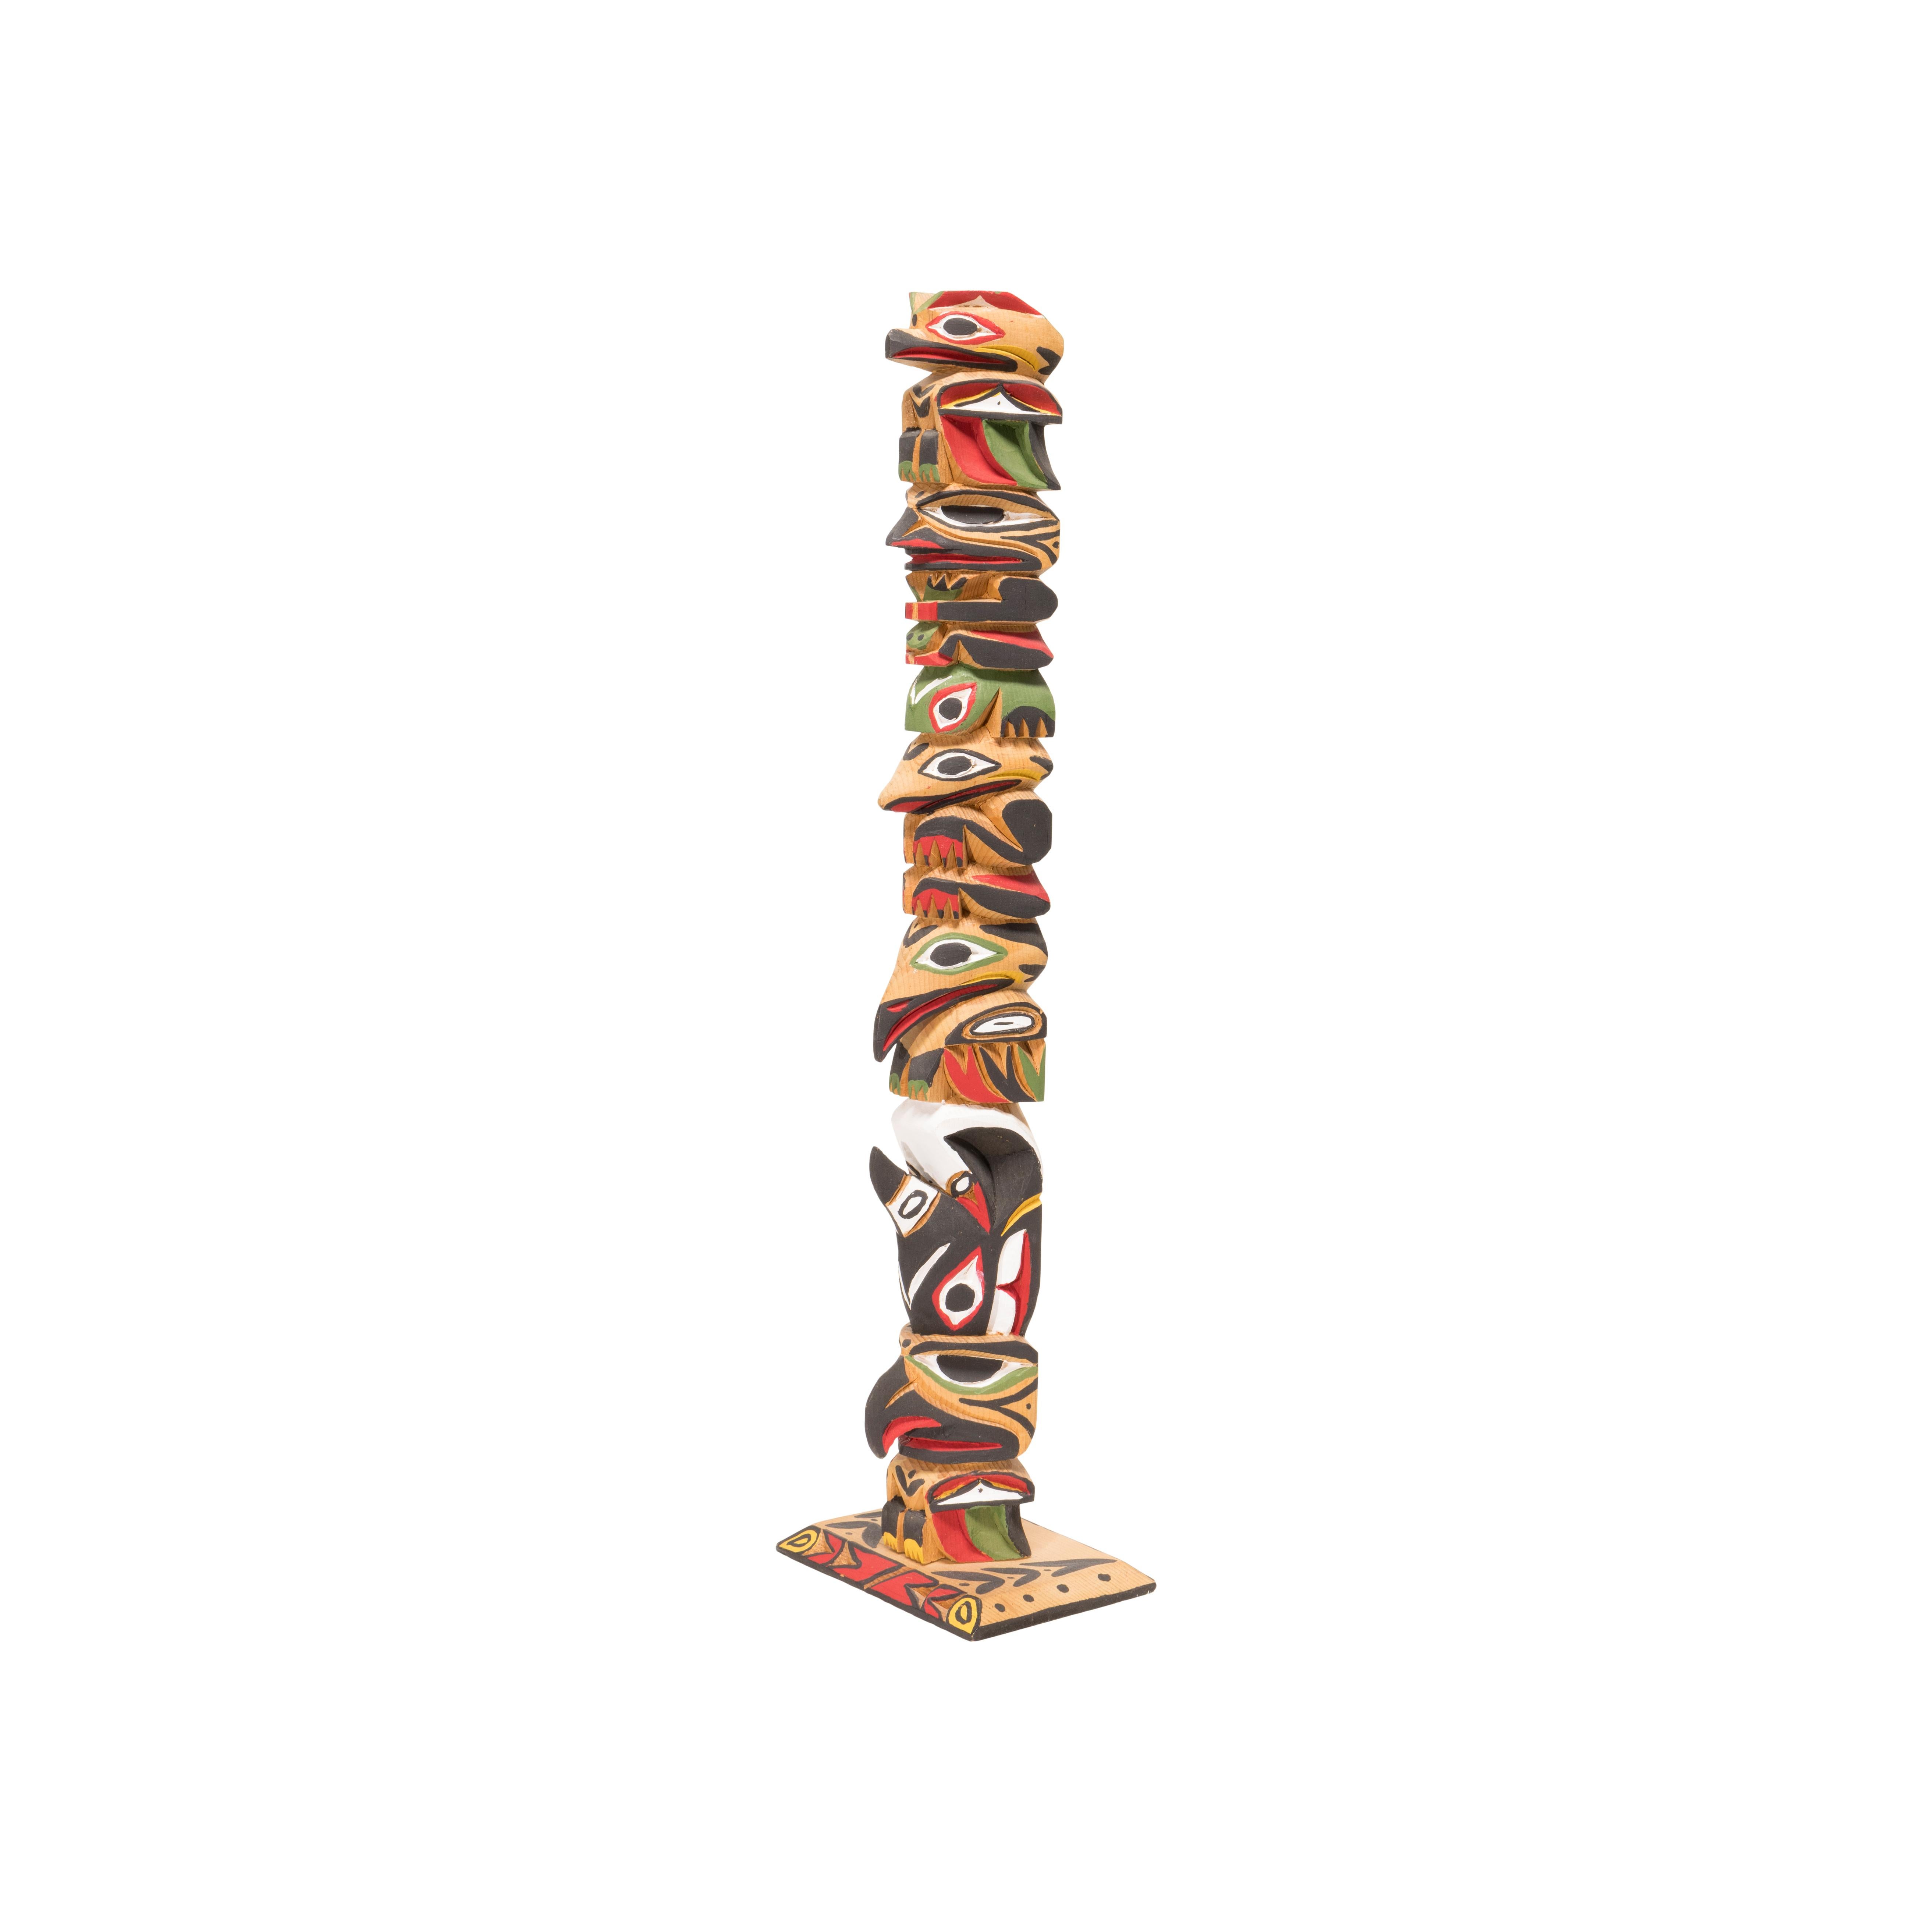 Canadian Ditidaht/Nuu-chah-nulth Totem by Raymond Williams For Sale